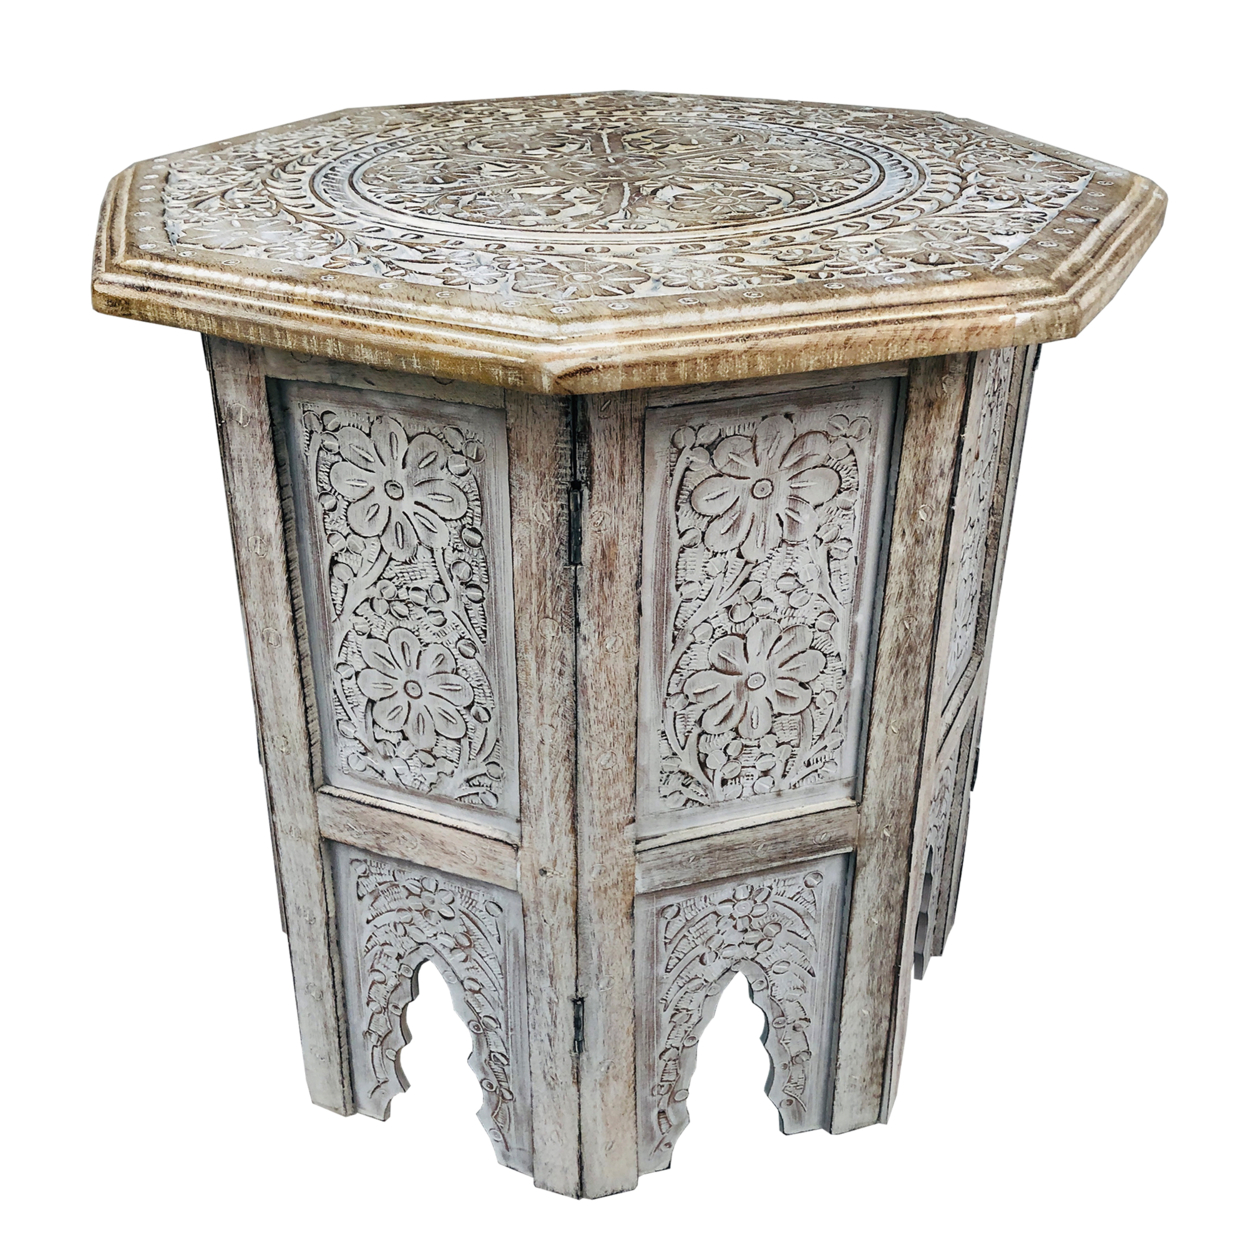 Farmhouse Wooden Side Table With Engraved Design And Octagonal Top, Antique Brown,Saltoro Sherpi